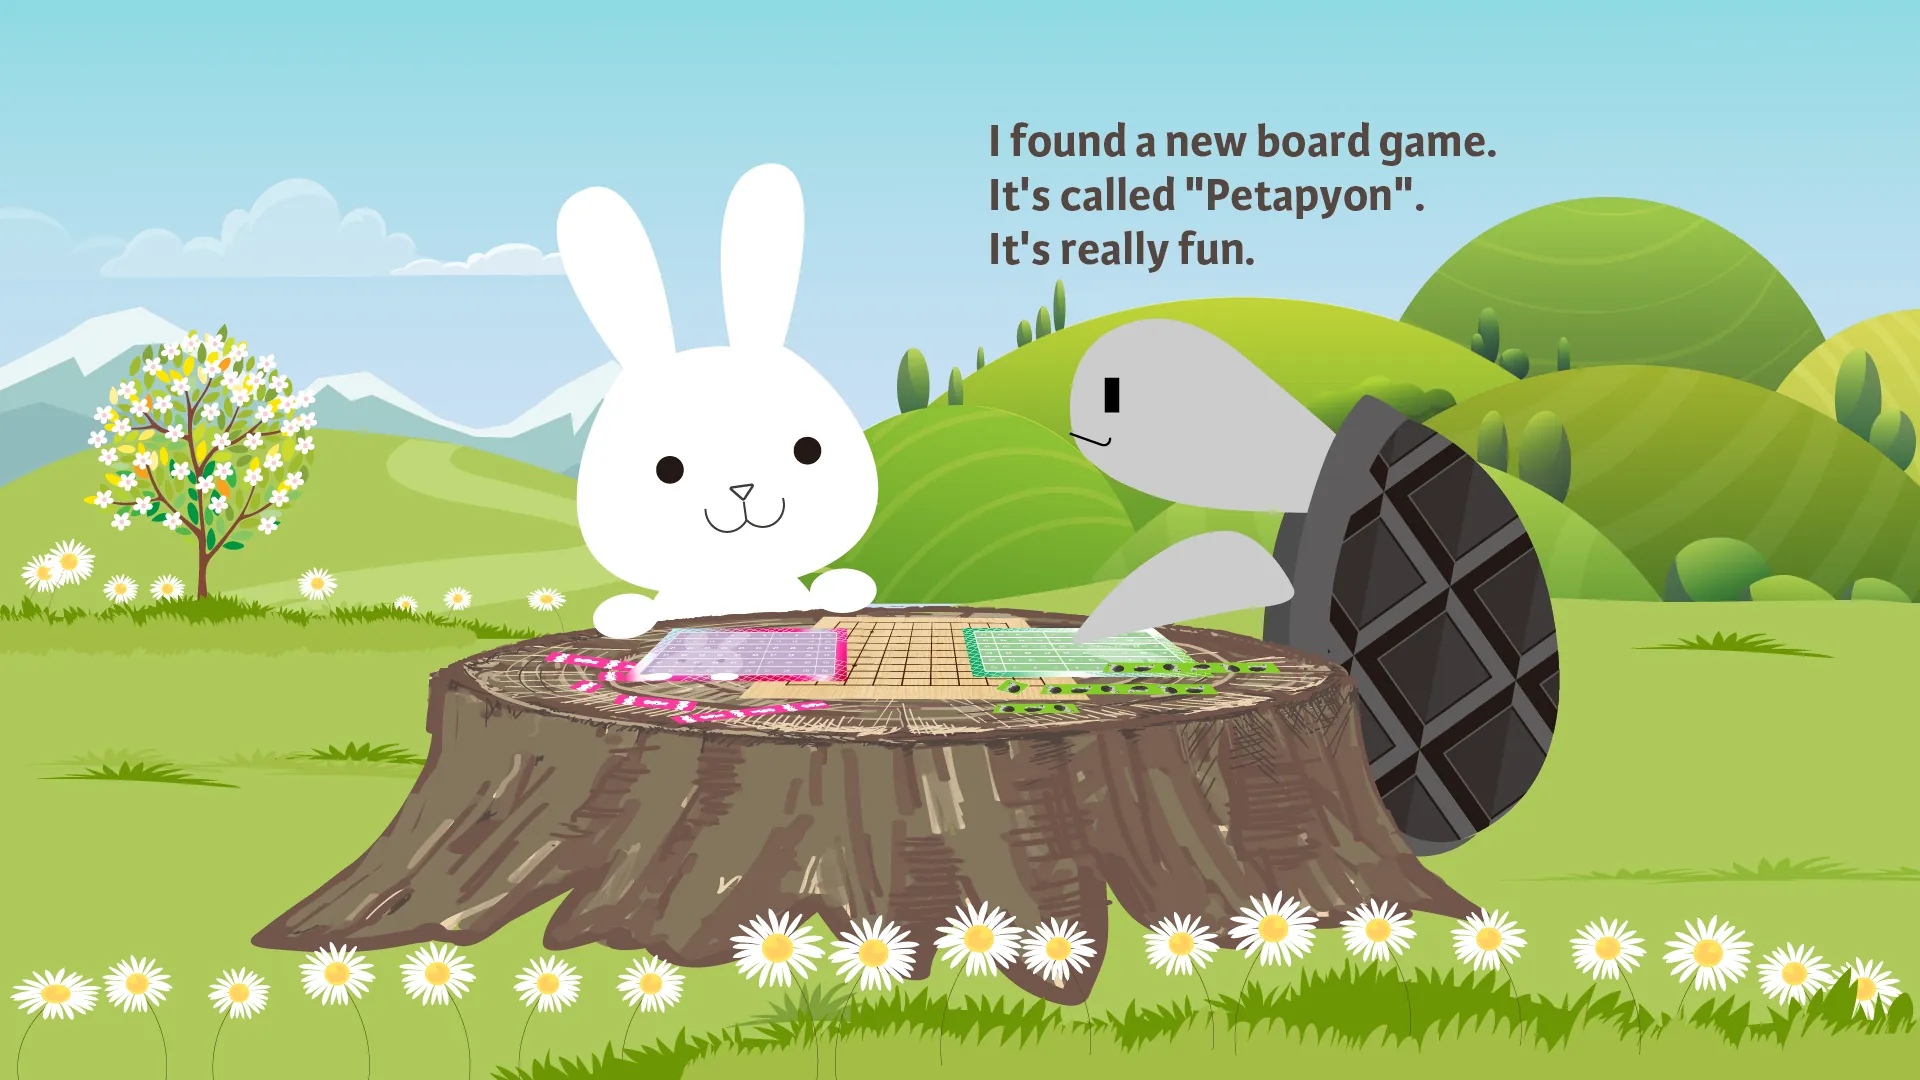 I found a new board game.It's called 'Petapyon'.It's really fun.